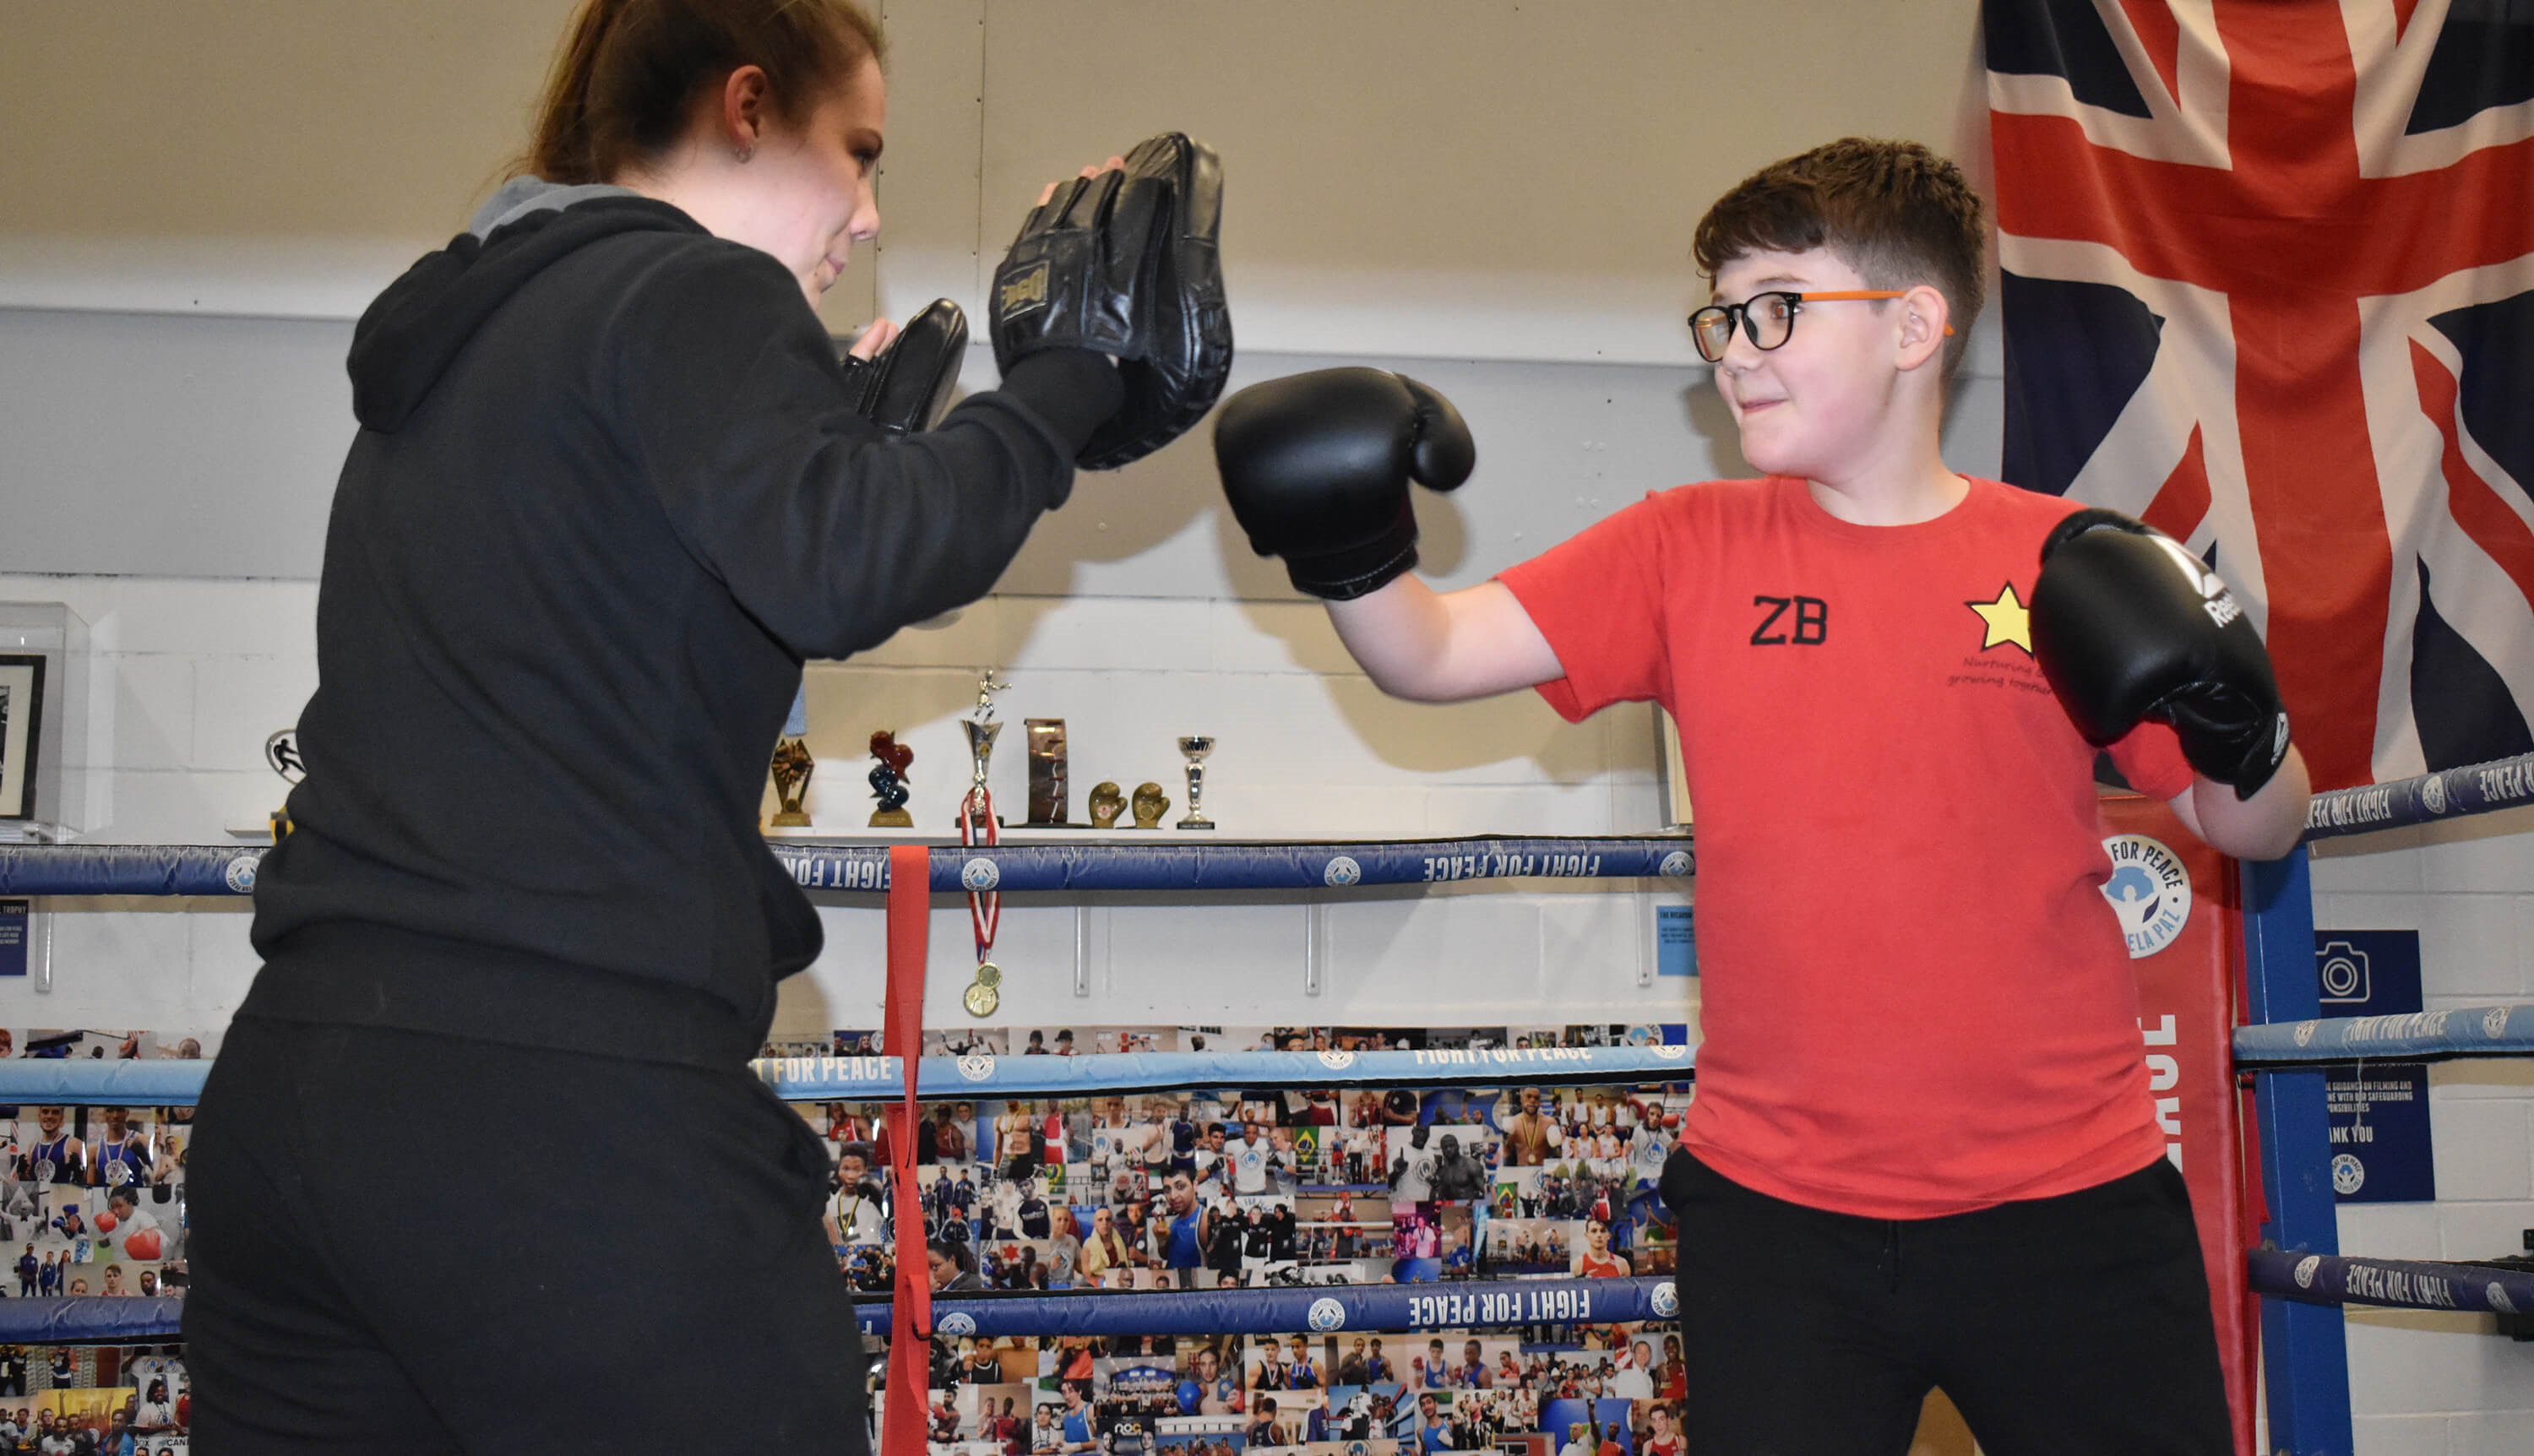 Young boxer wearing a red t-shirt delivers a right hand punch to the pads during training in the ring